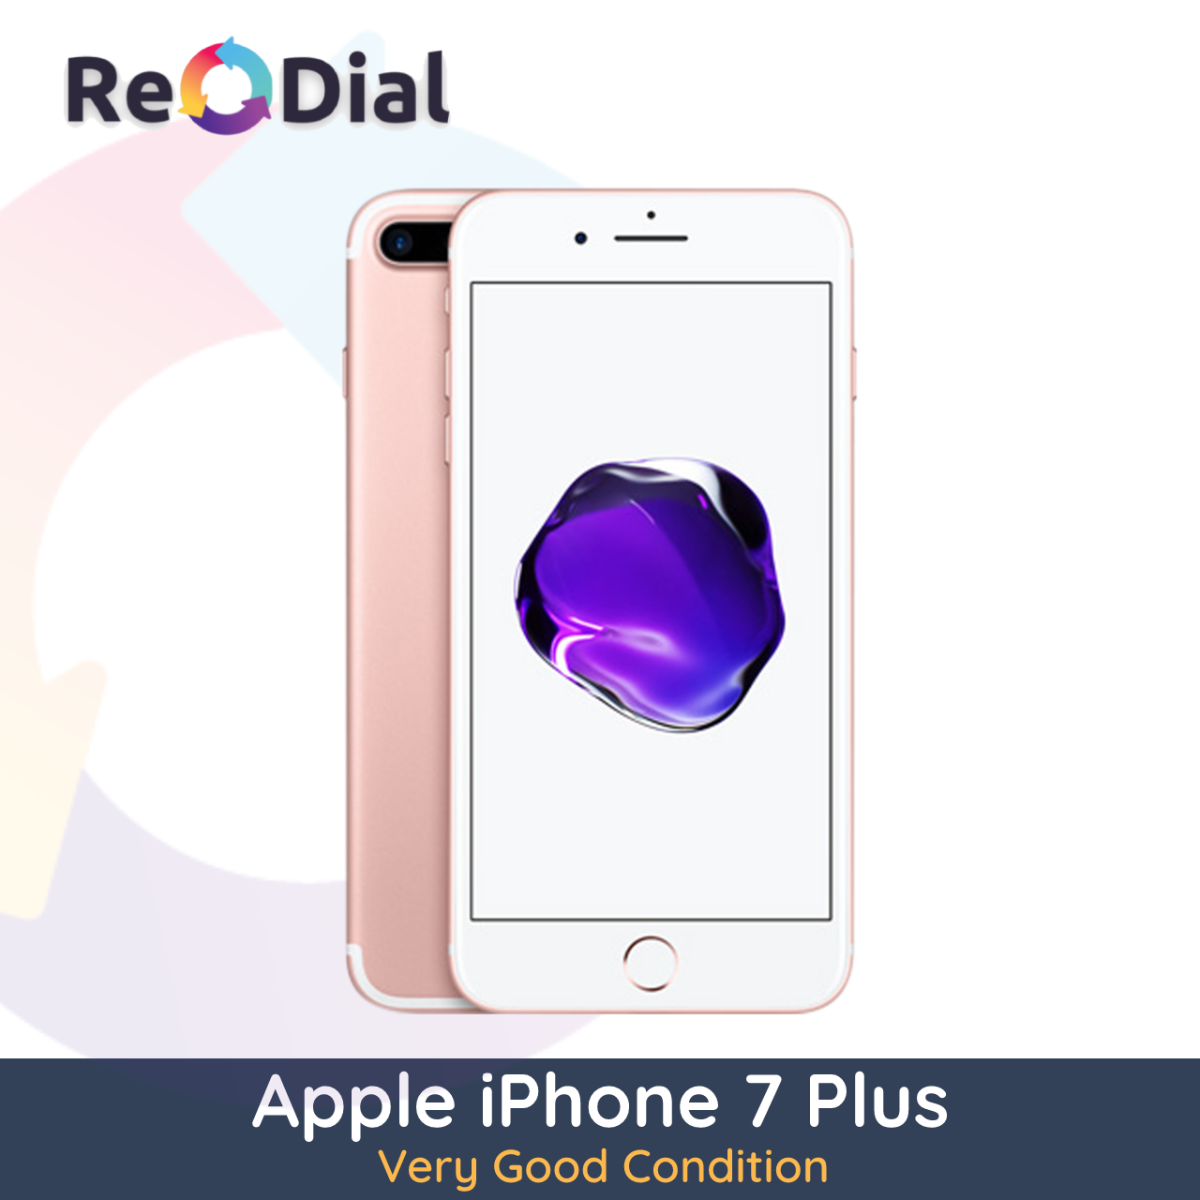 Buy Refurbished Apple iPhone 7 Plus - FREE Express Delivery